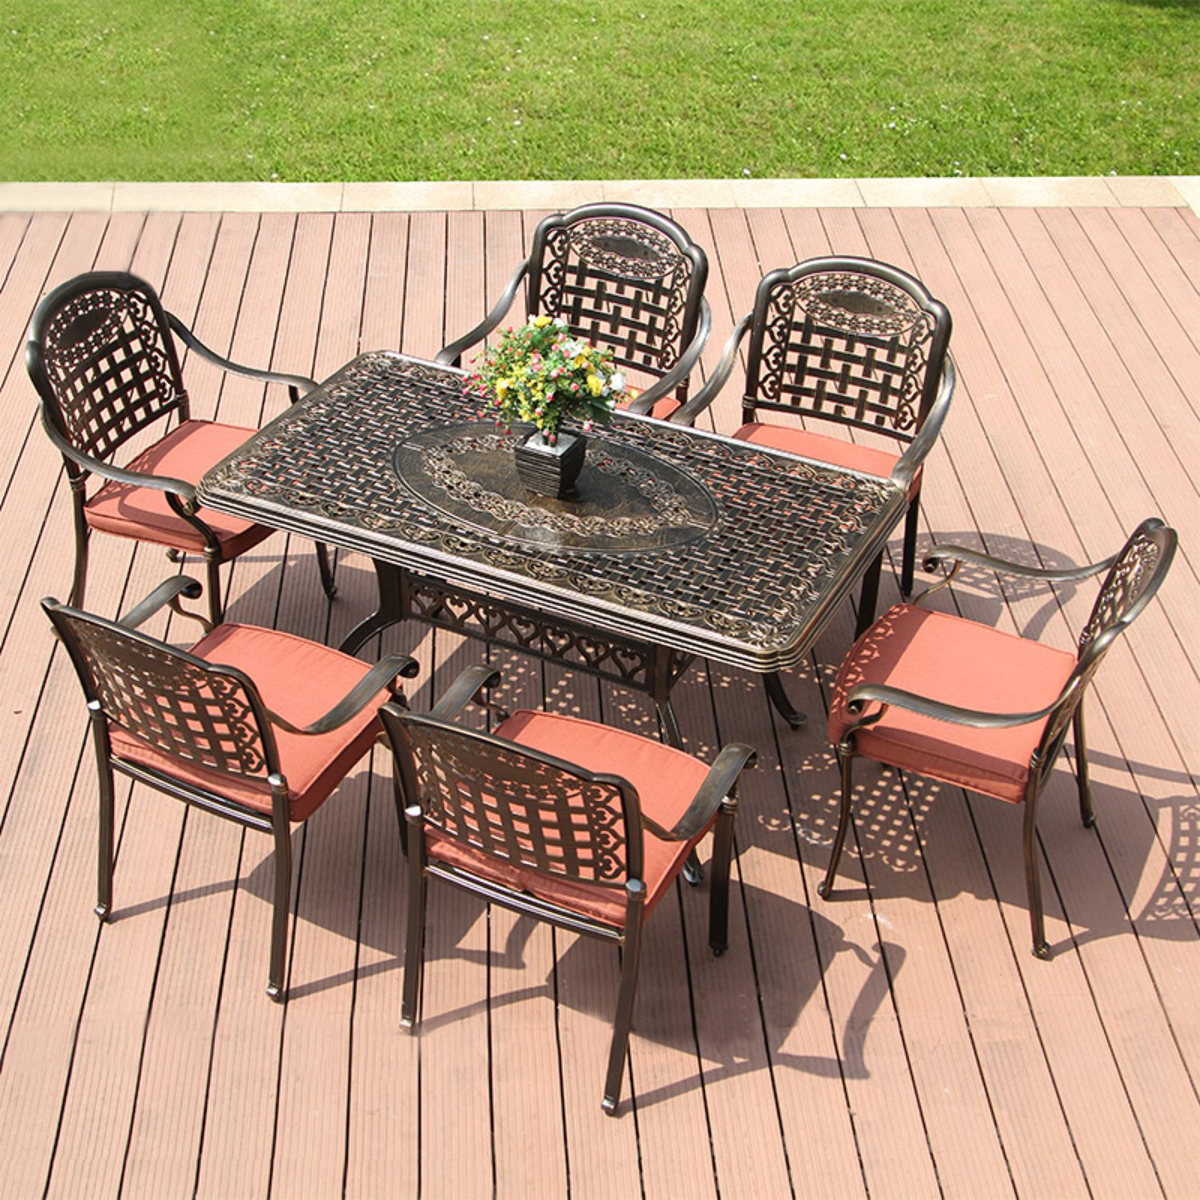 4 Seats And 6 Seats Outdoor Dining Set Cast Aluminum with Waterproof Cushion